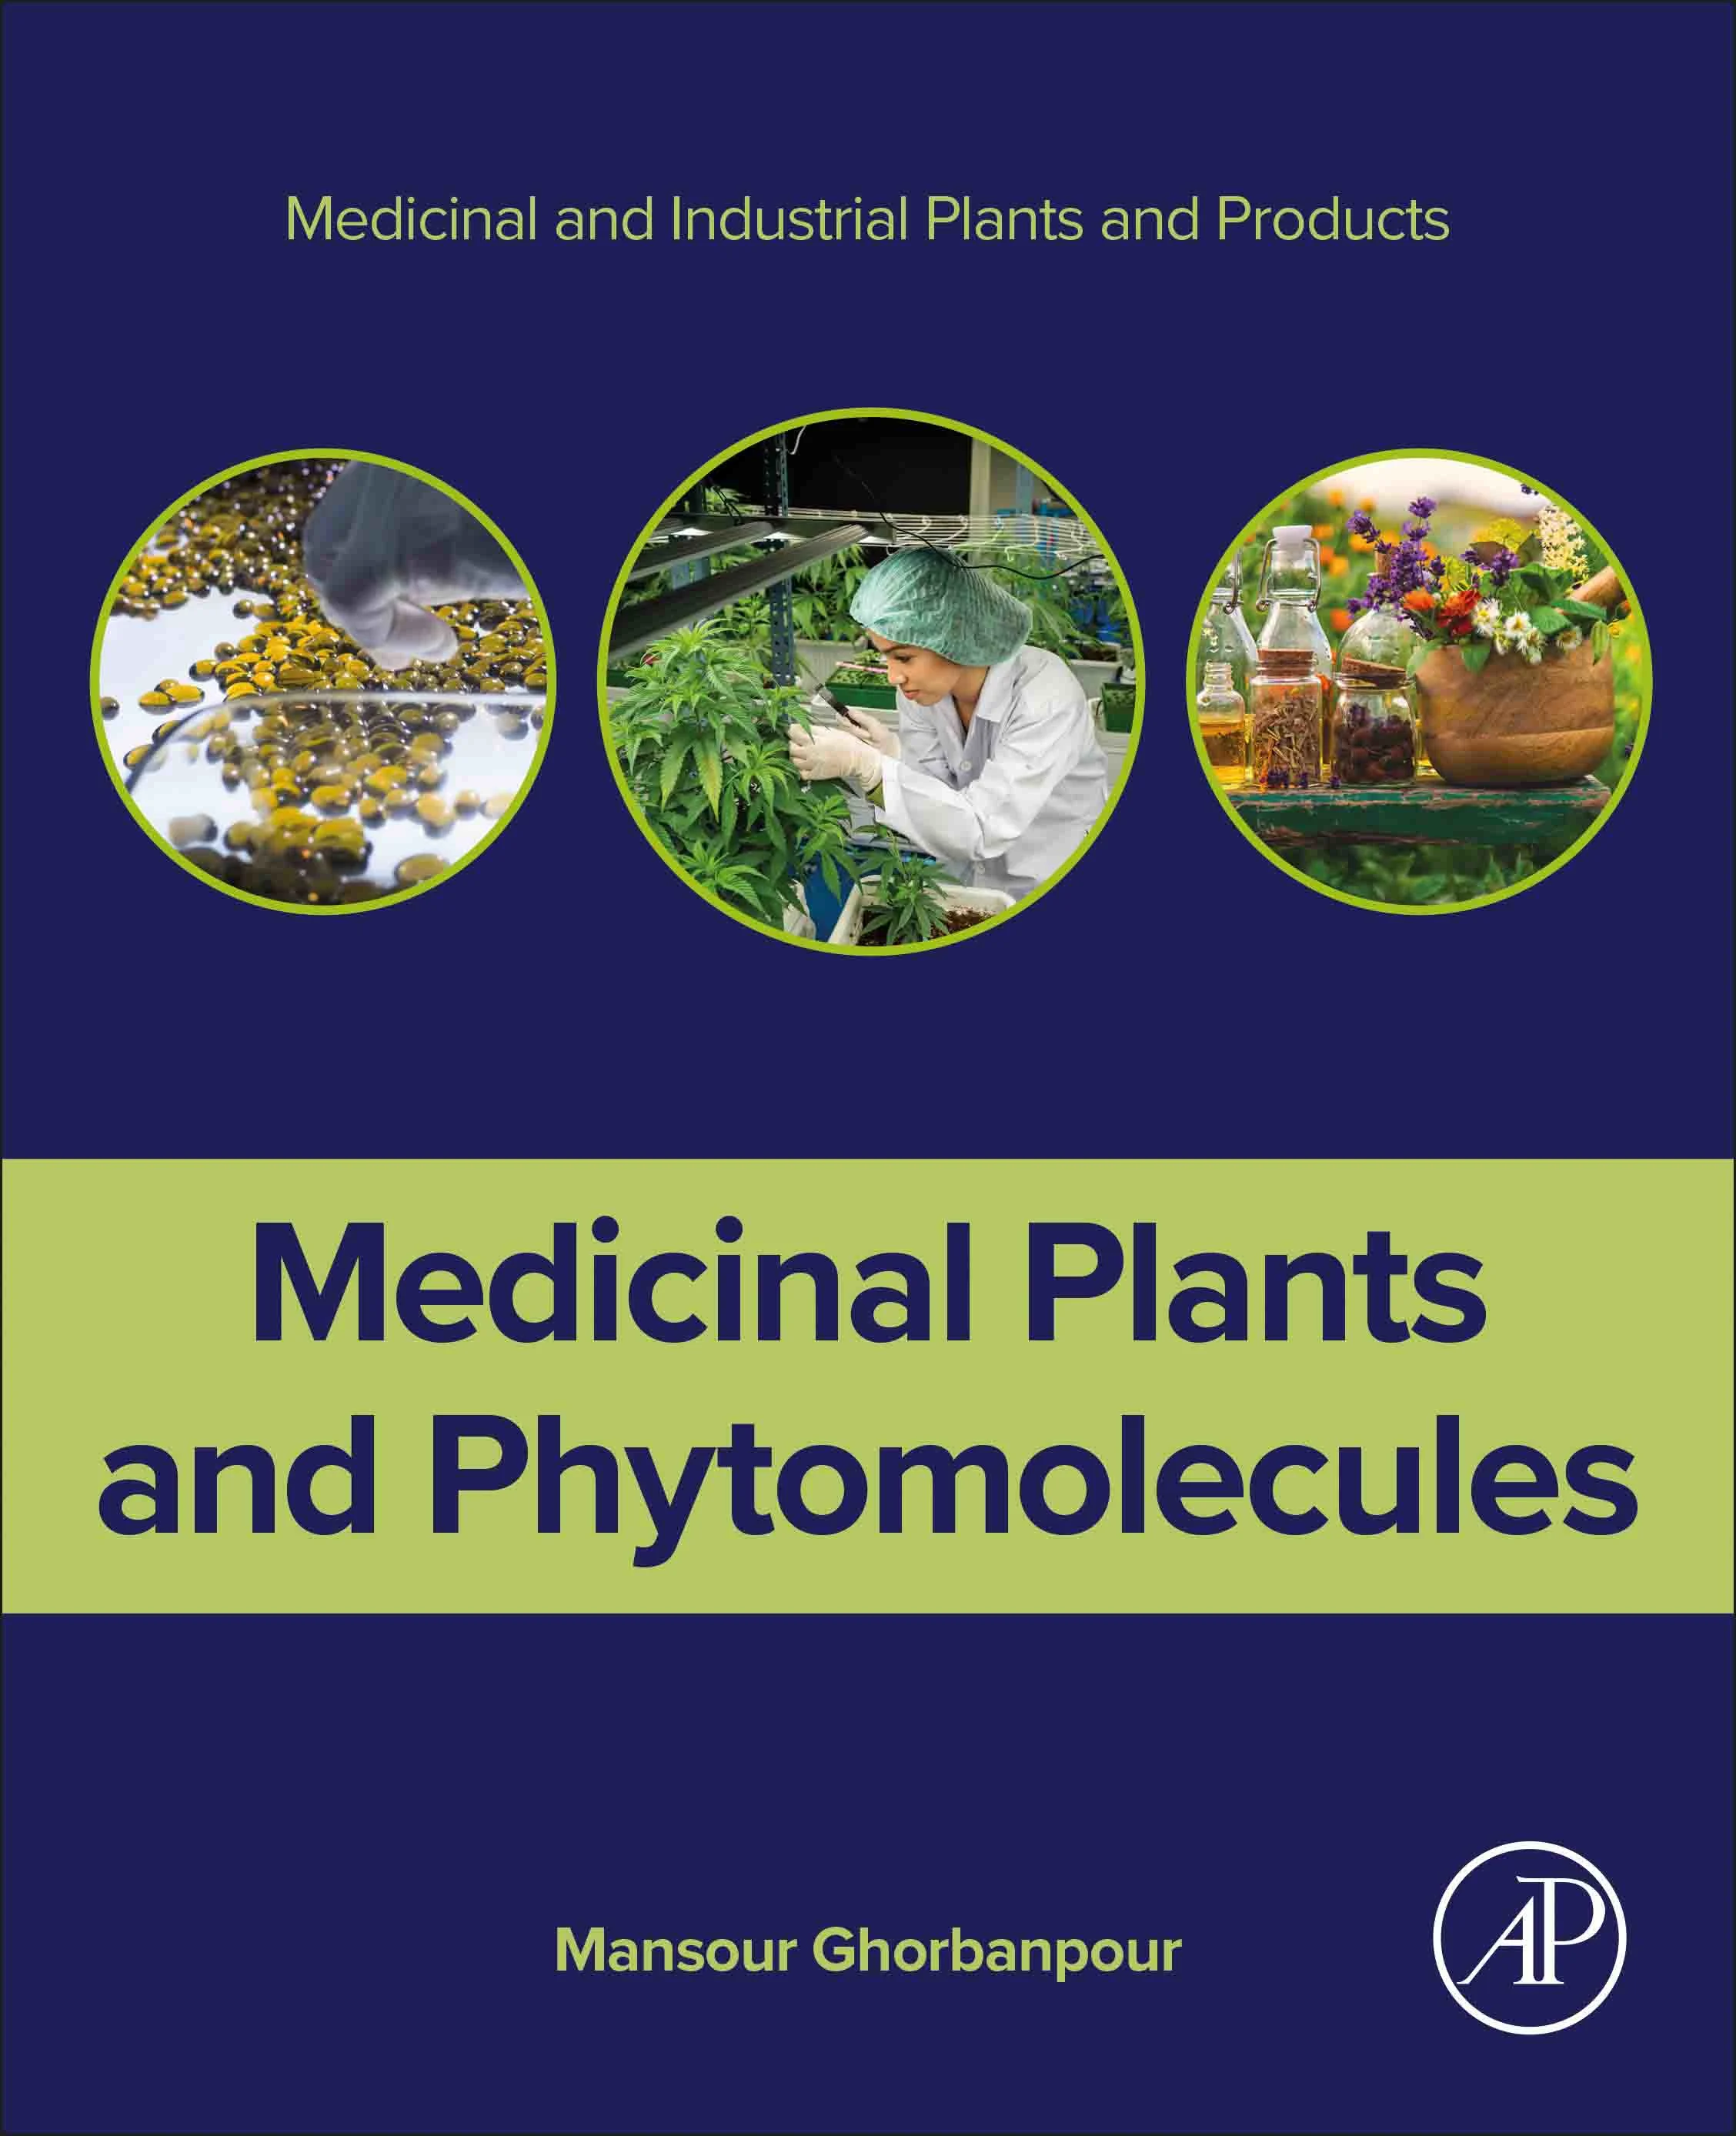 Medicinal and Industrial Plants Front cover